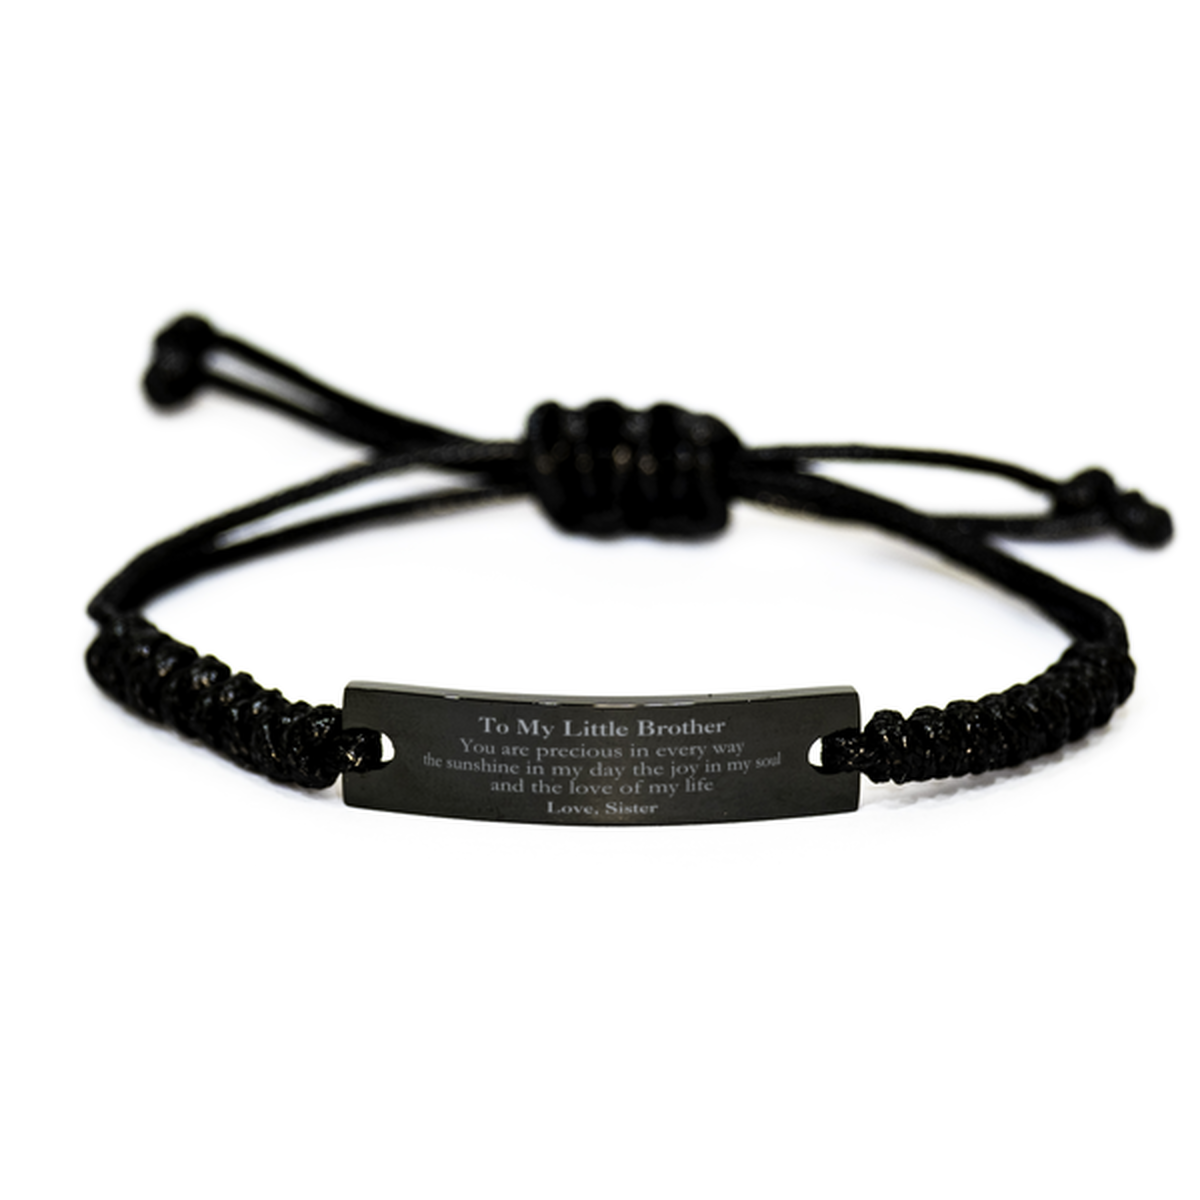 Graduation Gifts for Little Brother Black Rope Bracelet Present from Sister, Christmas Little Brother Birthday Gifts Little Brother You are precious in every way the sunshine in my day. Love, Sister